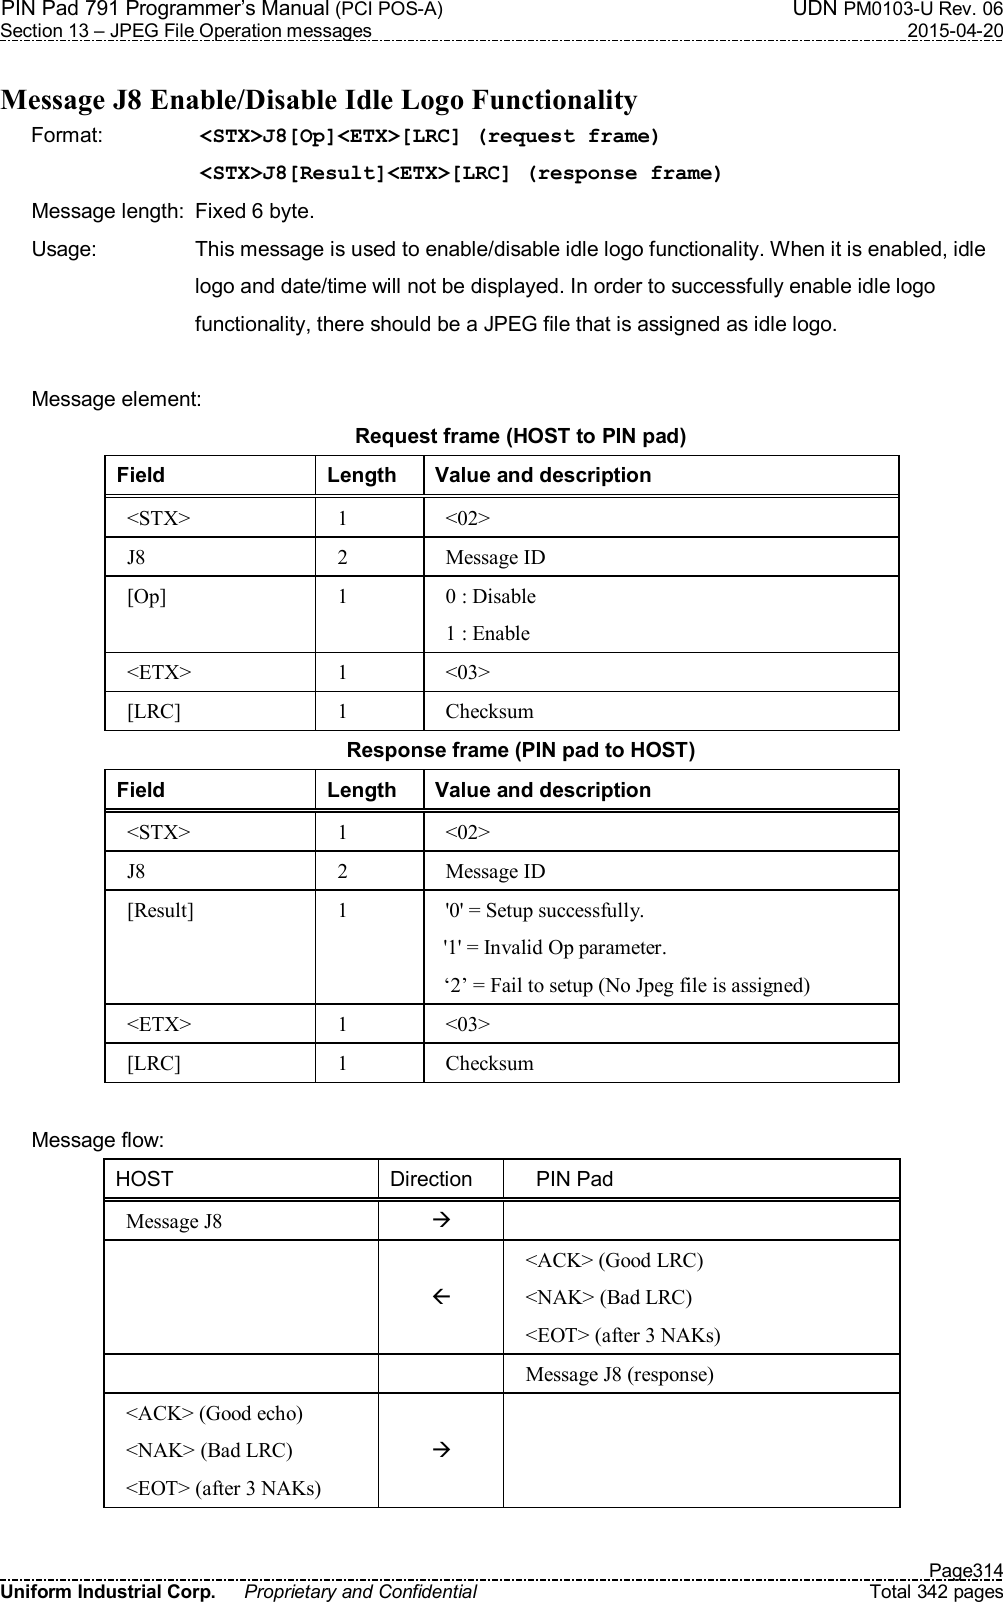 PIN Pad 791 Programmer’s Manual (PCI POS-A)  UDN PM0103-U Rev. 06 Section 13 – JPEG File Operation messages  2015-04-20   Page314 Uniform Industrial Corp.  Proprietary and Confidential  Total 342 pages  Message J8 Enable/Disable Idle Logo Functionality Format:    &lt;STX&gt;J8[Op]&lt;ETX&gt;[LRC] (request frame)         &lt;STX&gt;J8[Result]&lt;ETX&gt;[LRC] (response frame) Message length:  Fixed 6 byte. Usage:  This message is used to enable/disable idle logo functionality. When it is enabled, idle logo and date/time will not be displayed. In order to successfully enable idle logo functionality, there should be a JPEG file that is assigned as idle logo.  Message element: Request frame (HOST to PIN pad) Field  Length  Value and description &lt;STX&gt;  1  &lt;02&gt; J8  2  Message ID [Op]  1  0 : Disable 1 : Enable &lt;ETX&gt;  1  &lt;03&gt; [LRC]  1  Checksum Response frame (PIN pad to HOST) Field  Length  Value and description &lt;STX&gt;  1  &lt;02&gt; J8  2  Message ID [Result]  1  &apos;0&apos; = Setup successfully. &apos;1&apos; = Invalid Op parameter. ‘2’ = Fail to setup (No Jpeg file is assigned) &lt;ETX&gt;  1  &lt;03&gt; [LRC]  1  Checksum  Message flow: HOST  Direction      PIN Pad Message J8      &lt;ACK&gt; (Good LRC) &lt;NAK&gt; (Bad LRC) &lt;EOT&gt; (after 3 NAKs)     Message J8 (response) &lt;ACK&gt; (Good echo) &lt;NAK&gt; (Bad LRC) &lt;EOT&gt; (after 3 NAKs)    